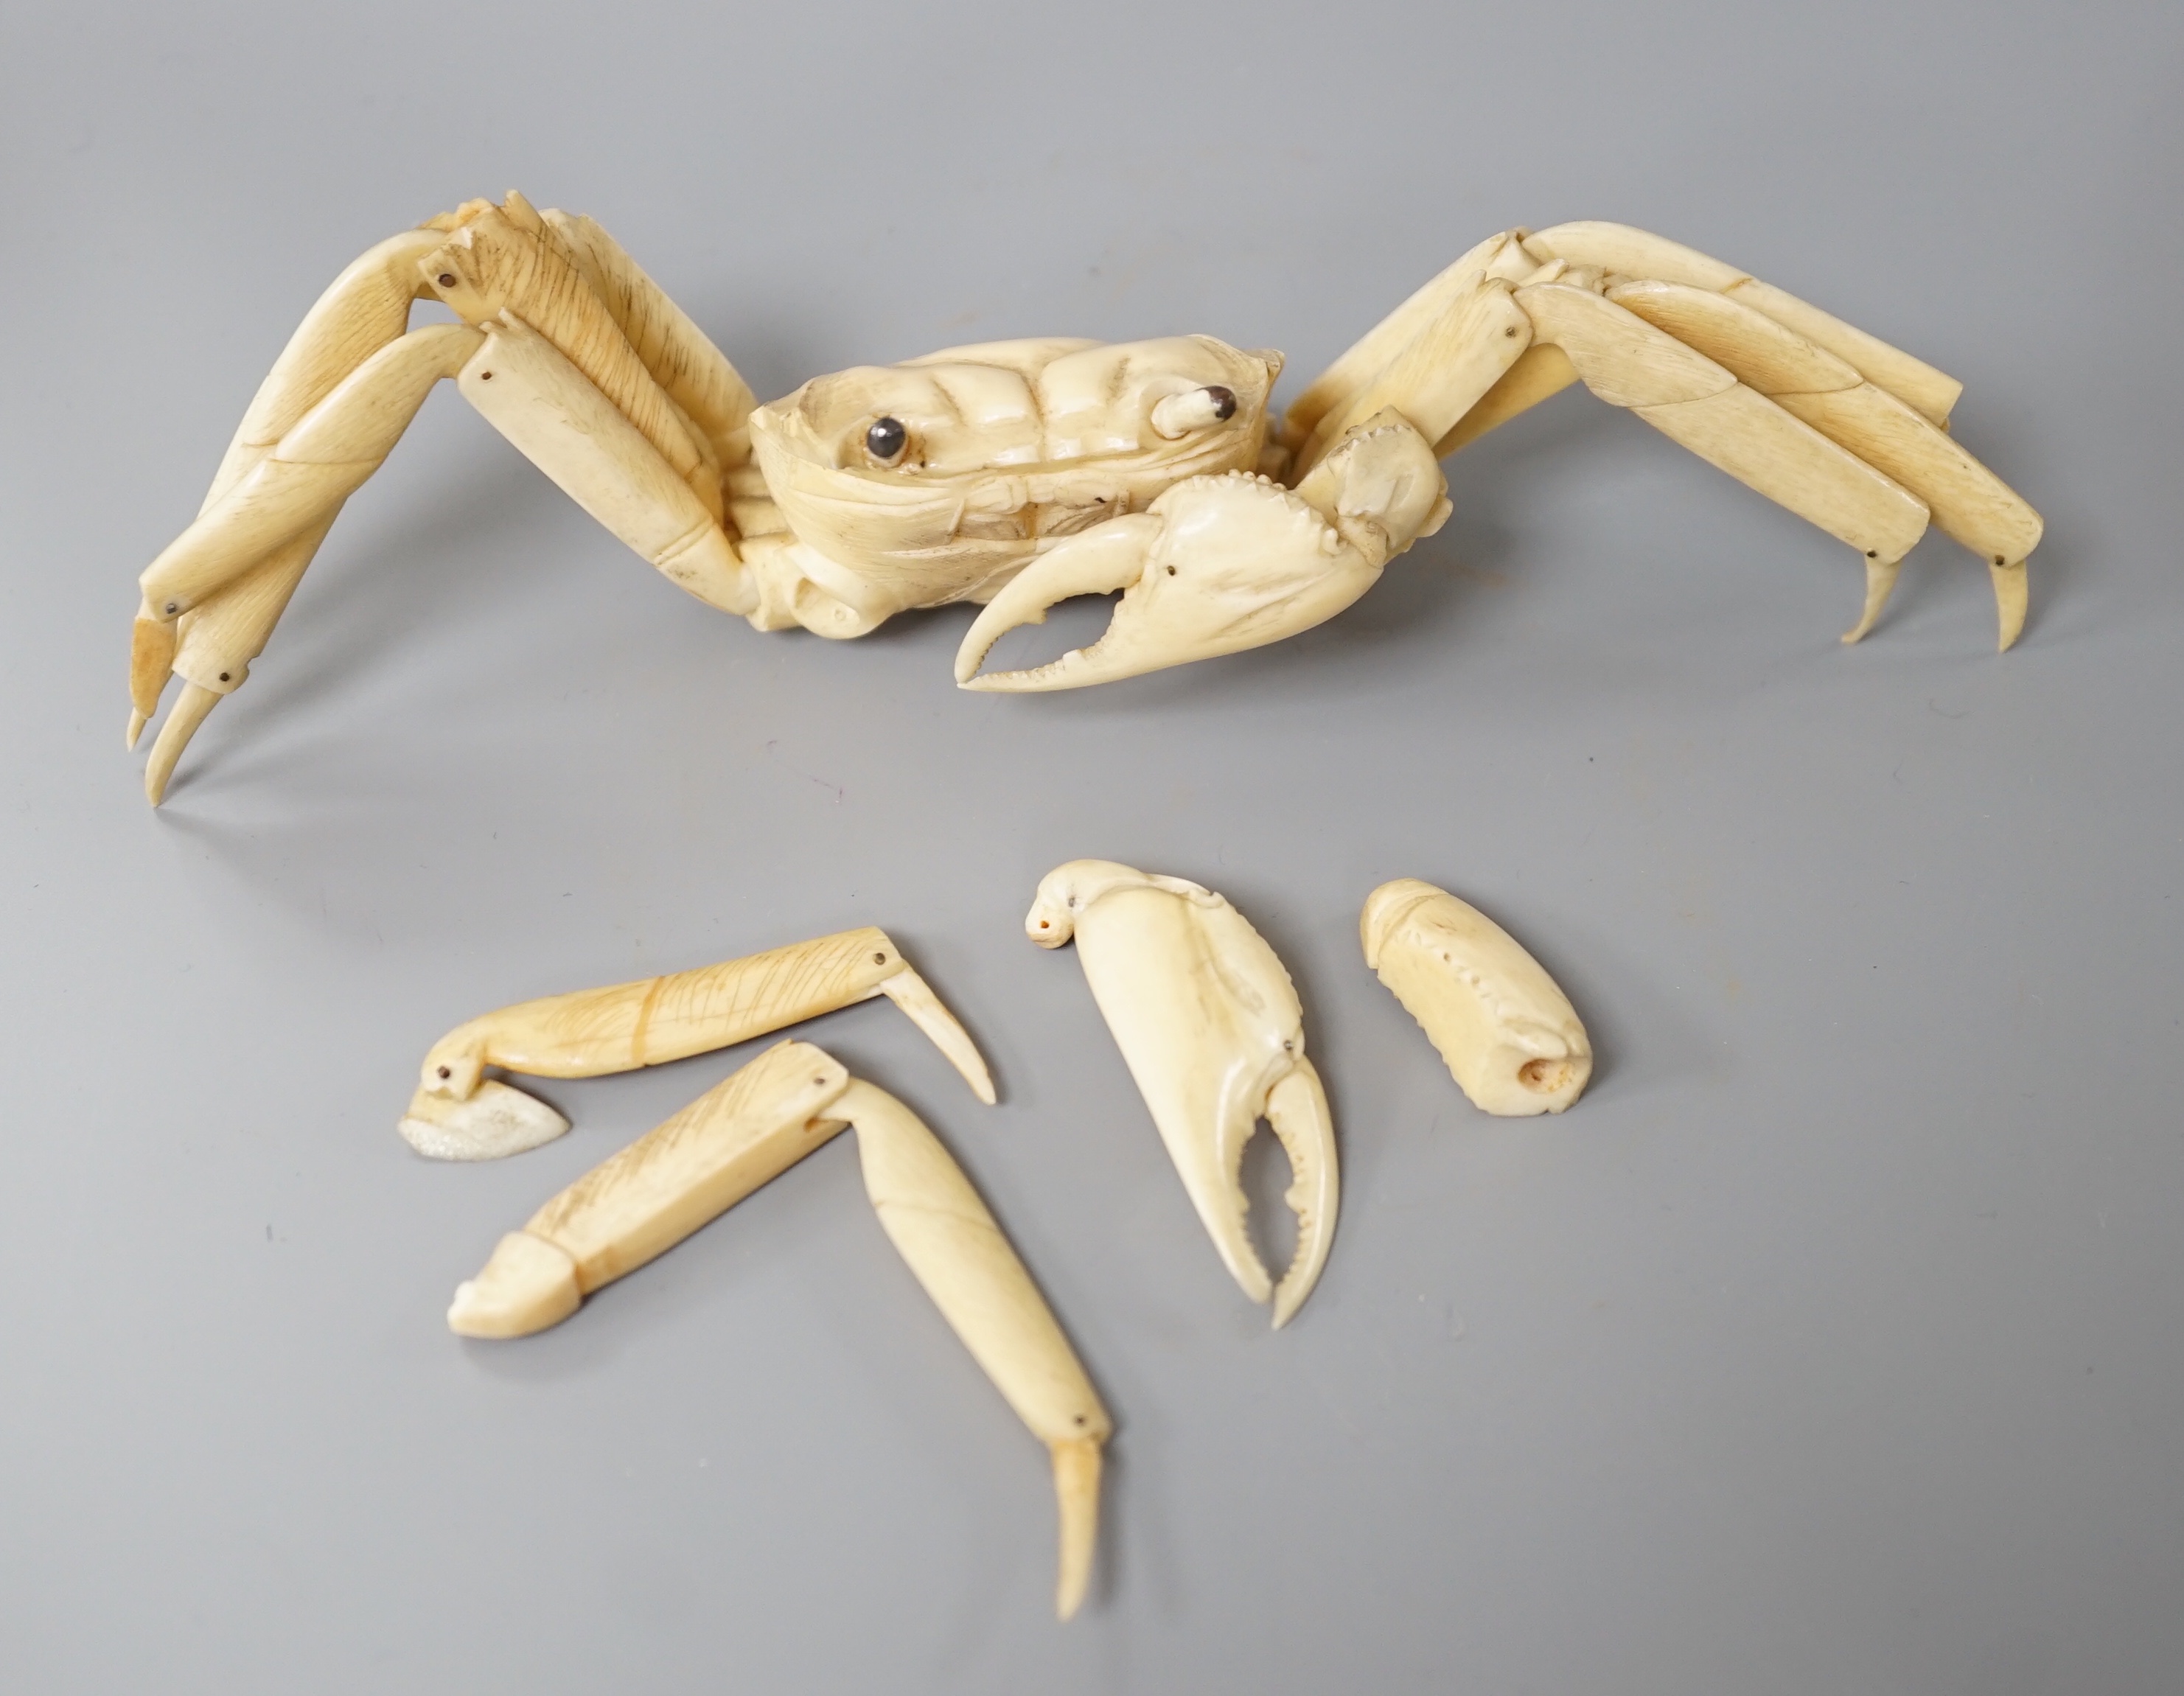 An early 20th century Japanese ivory articulated model of a crab, parts detached